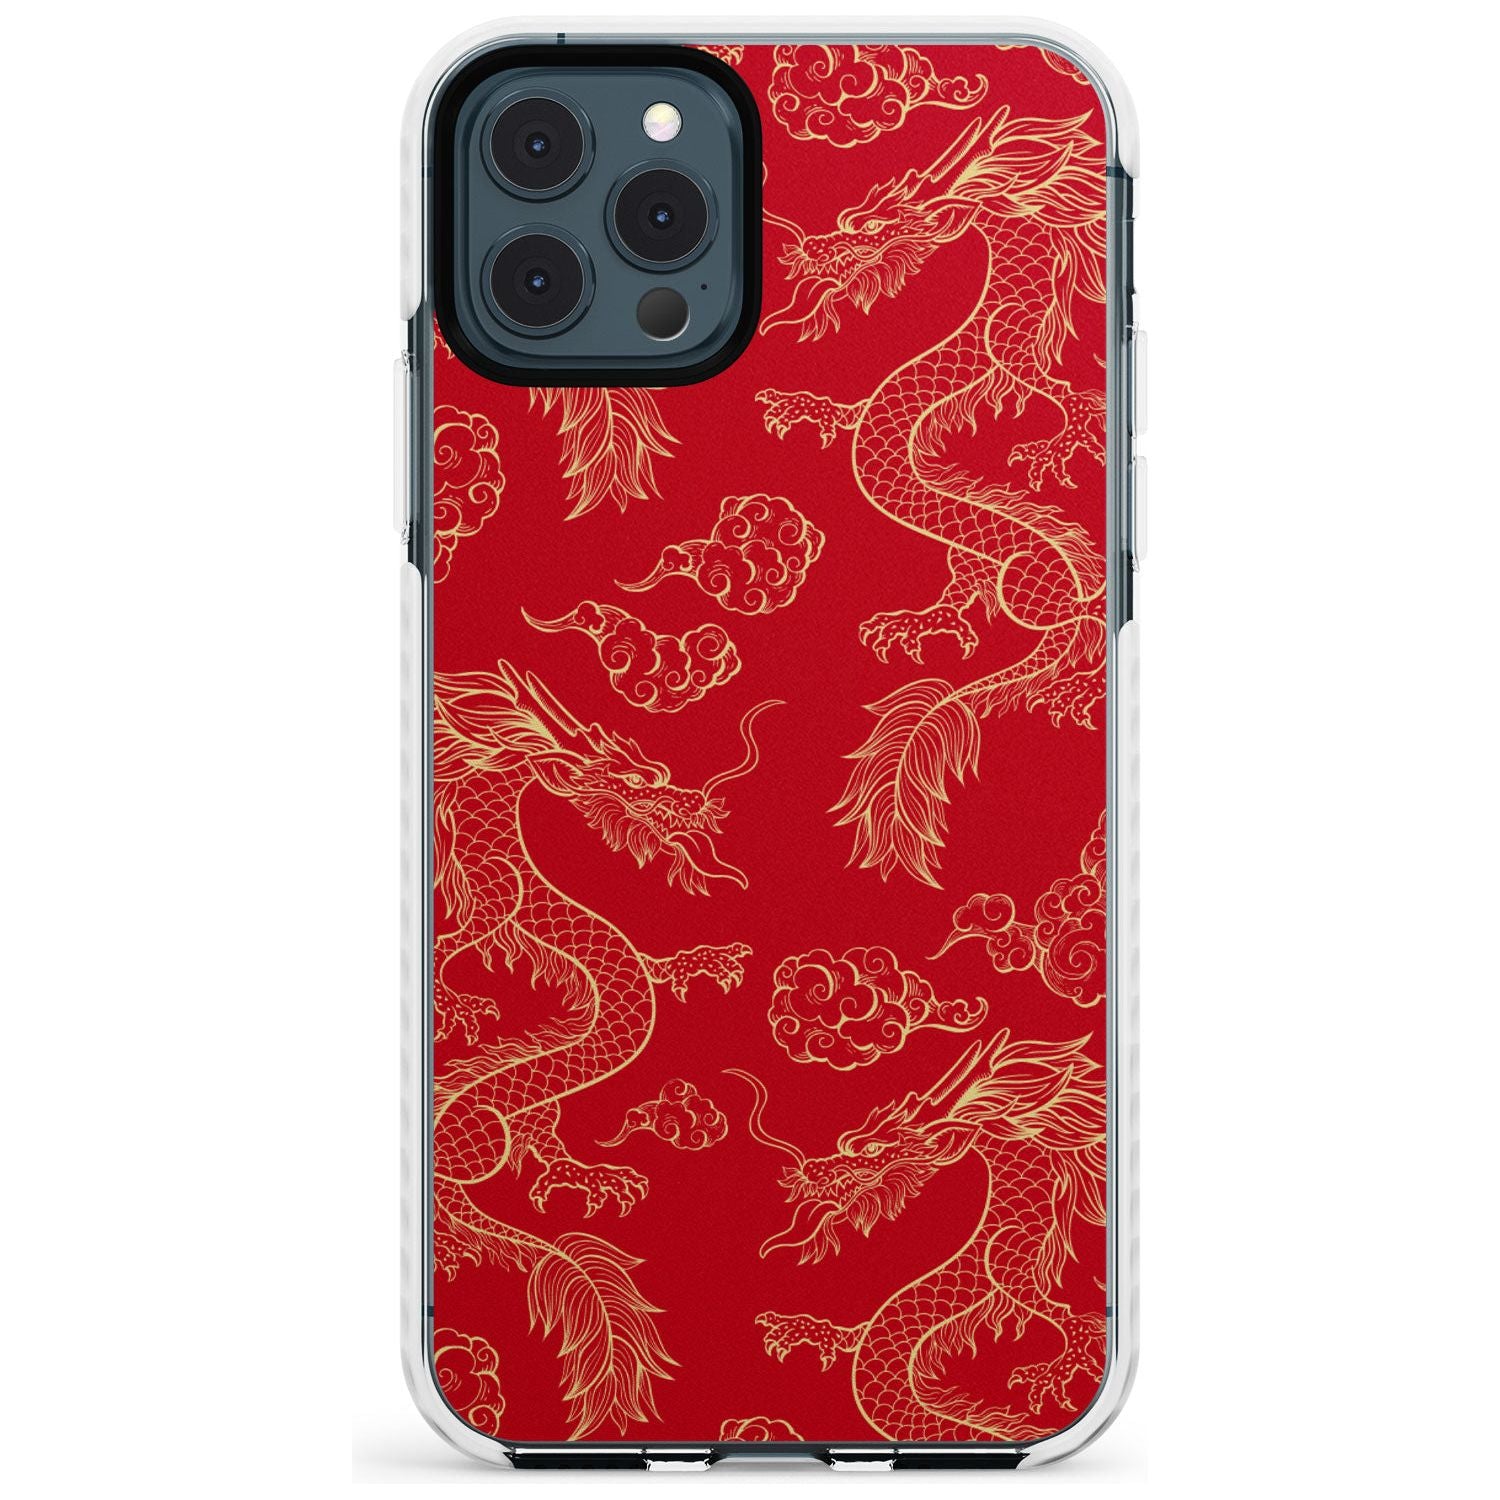 Red and Gold Dragon Pattern Impact Phone Case for iPhone 11 Pro Max